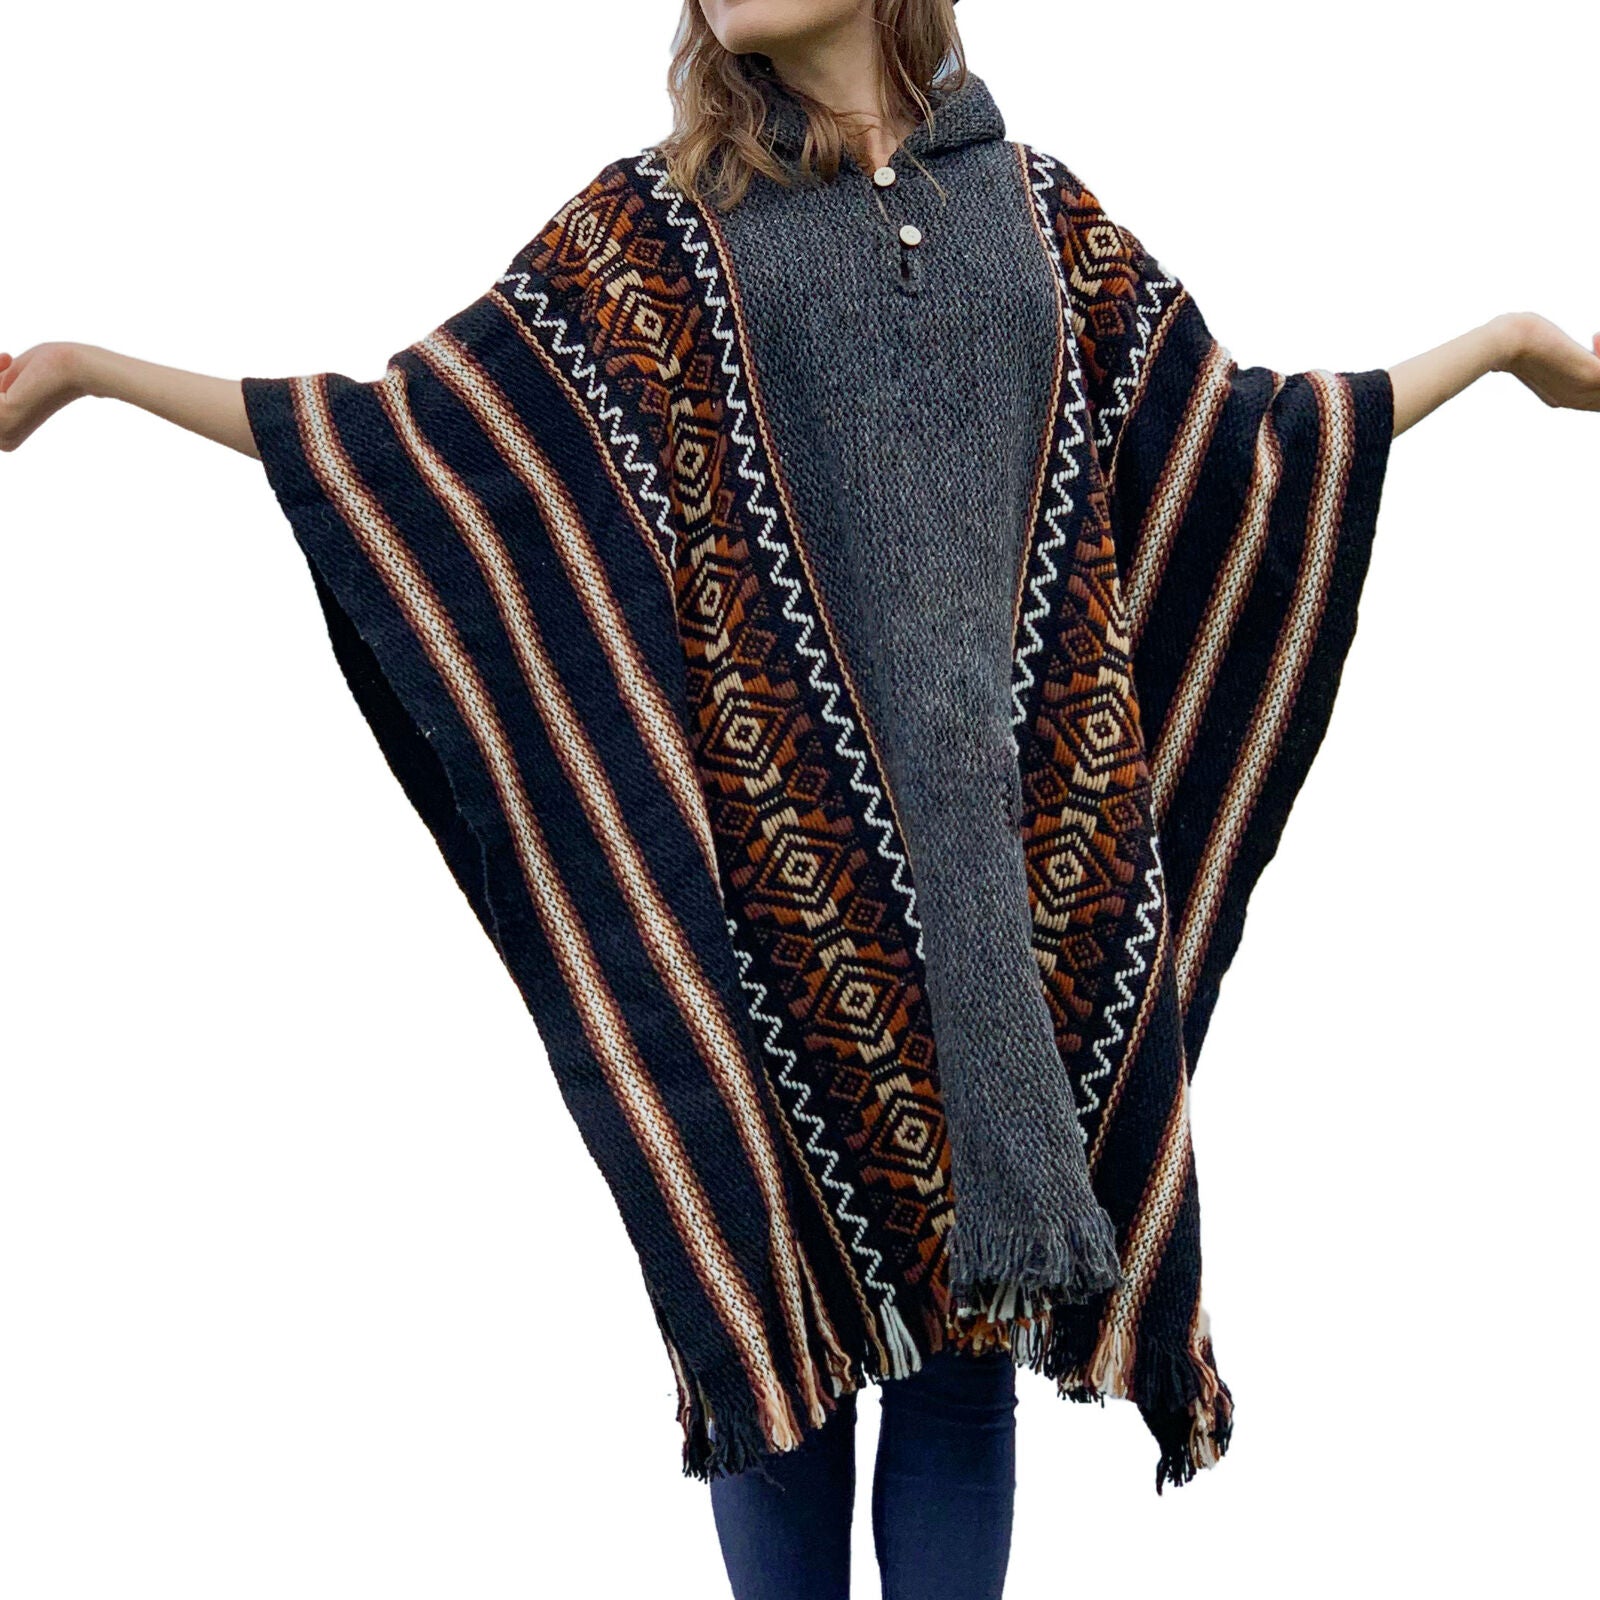 Llama Wool Unisex South American Handwoven Hooded Poncho - striped with diamonds pattern